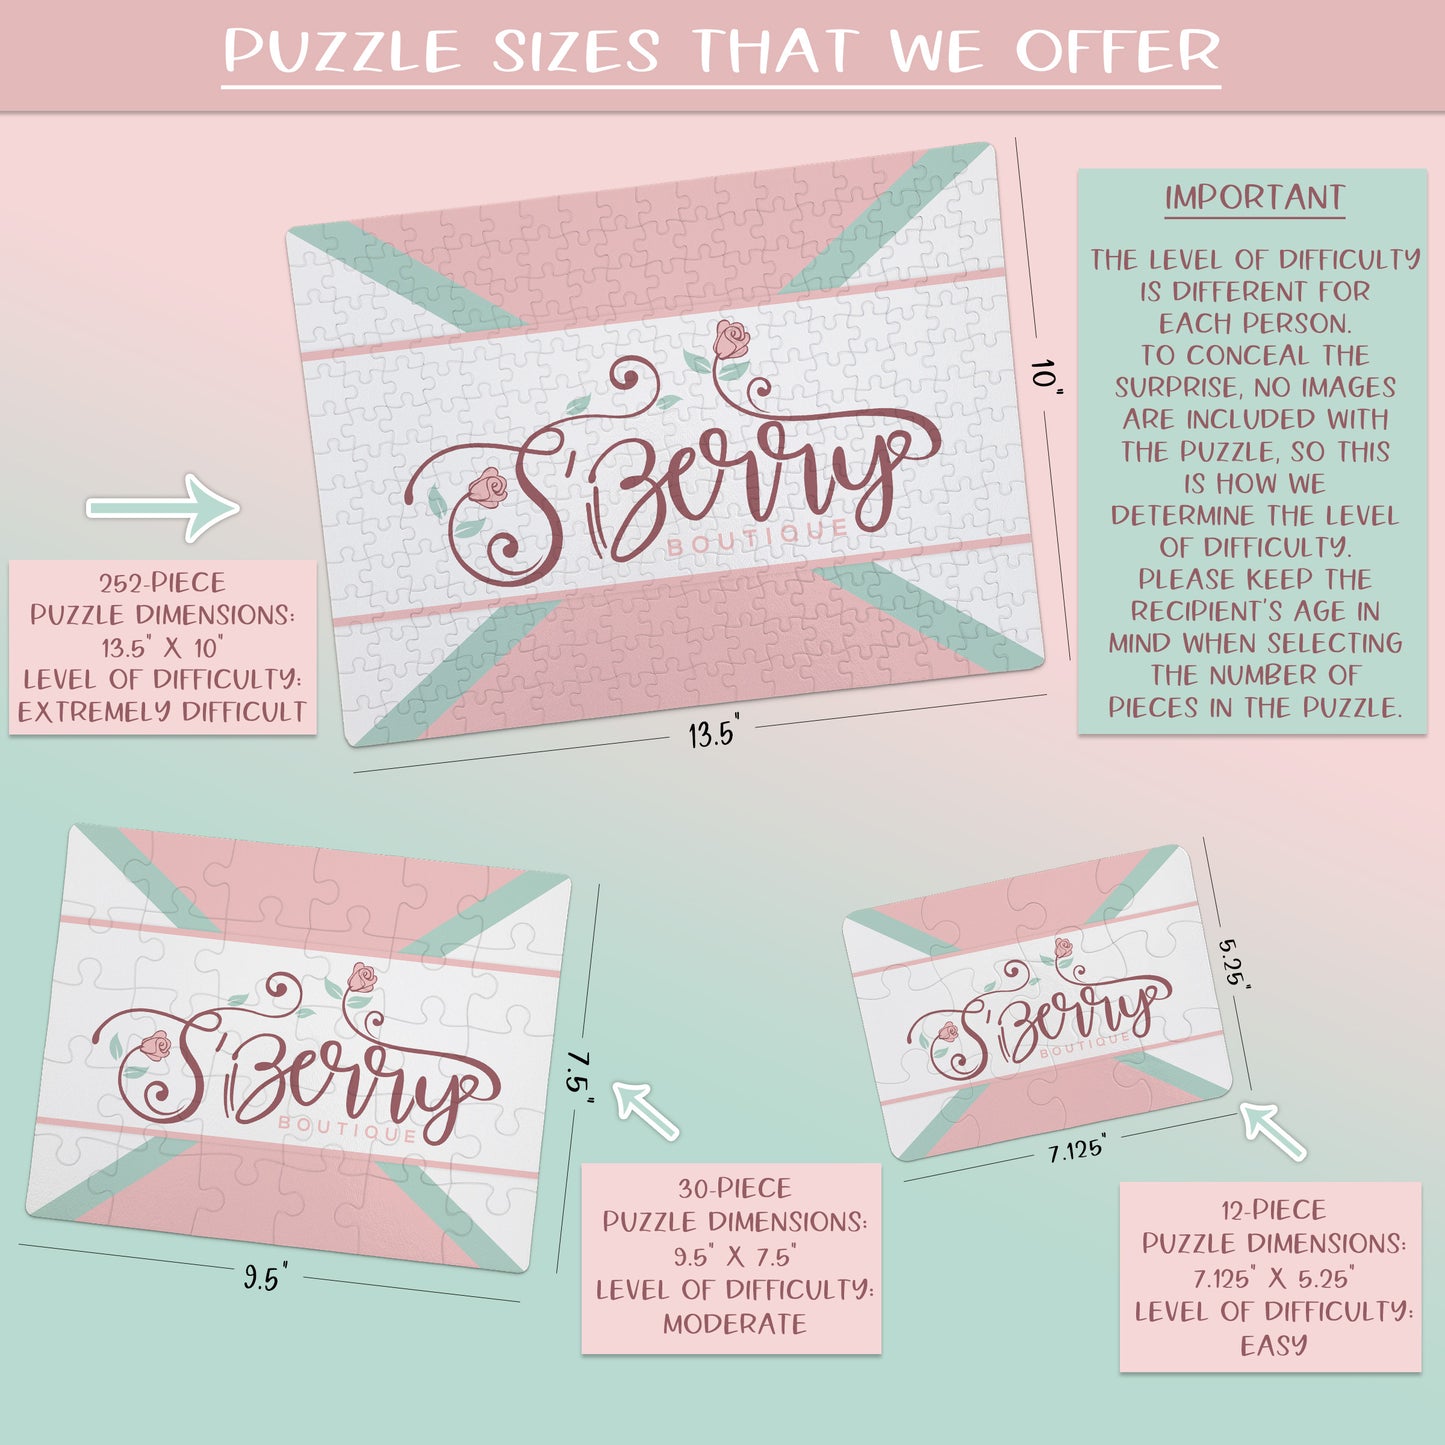 Create Your Own Puzzle - Floral Design - CYOP0019 | S'Berry Boutique